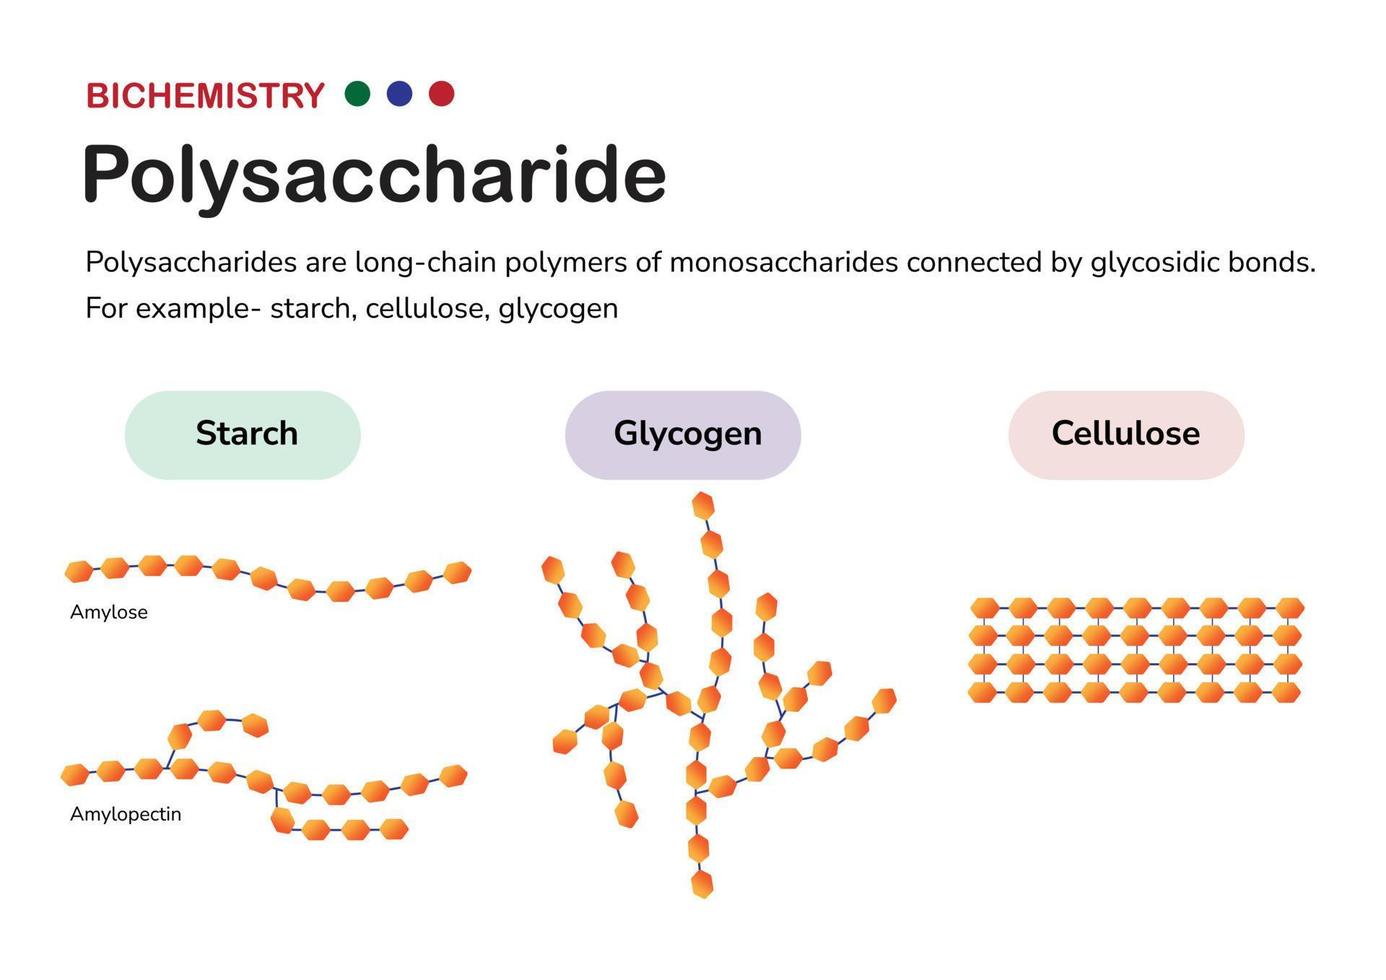 Biochemistry diagram present structure of polysaccharide such as starch amylose and amylopectin, glycogen, and cellulose, formed from monosaccharide sugar vector